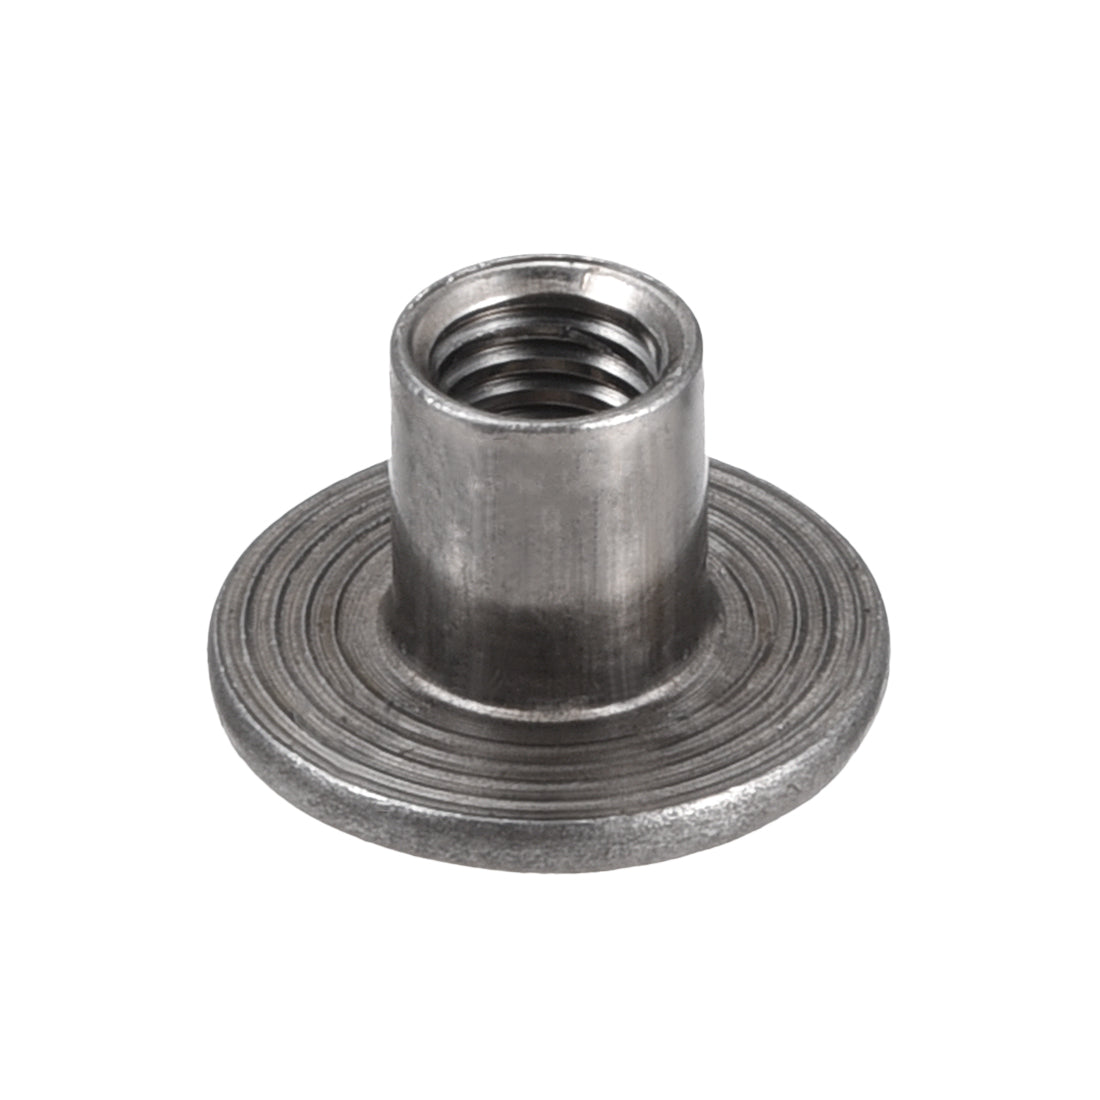 uxcell Uxcell Brad Hole Tee Nut, Carbon Steel Round Base Screw-In T-Nut